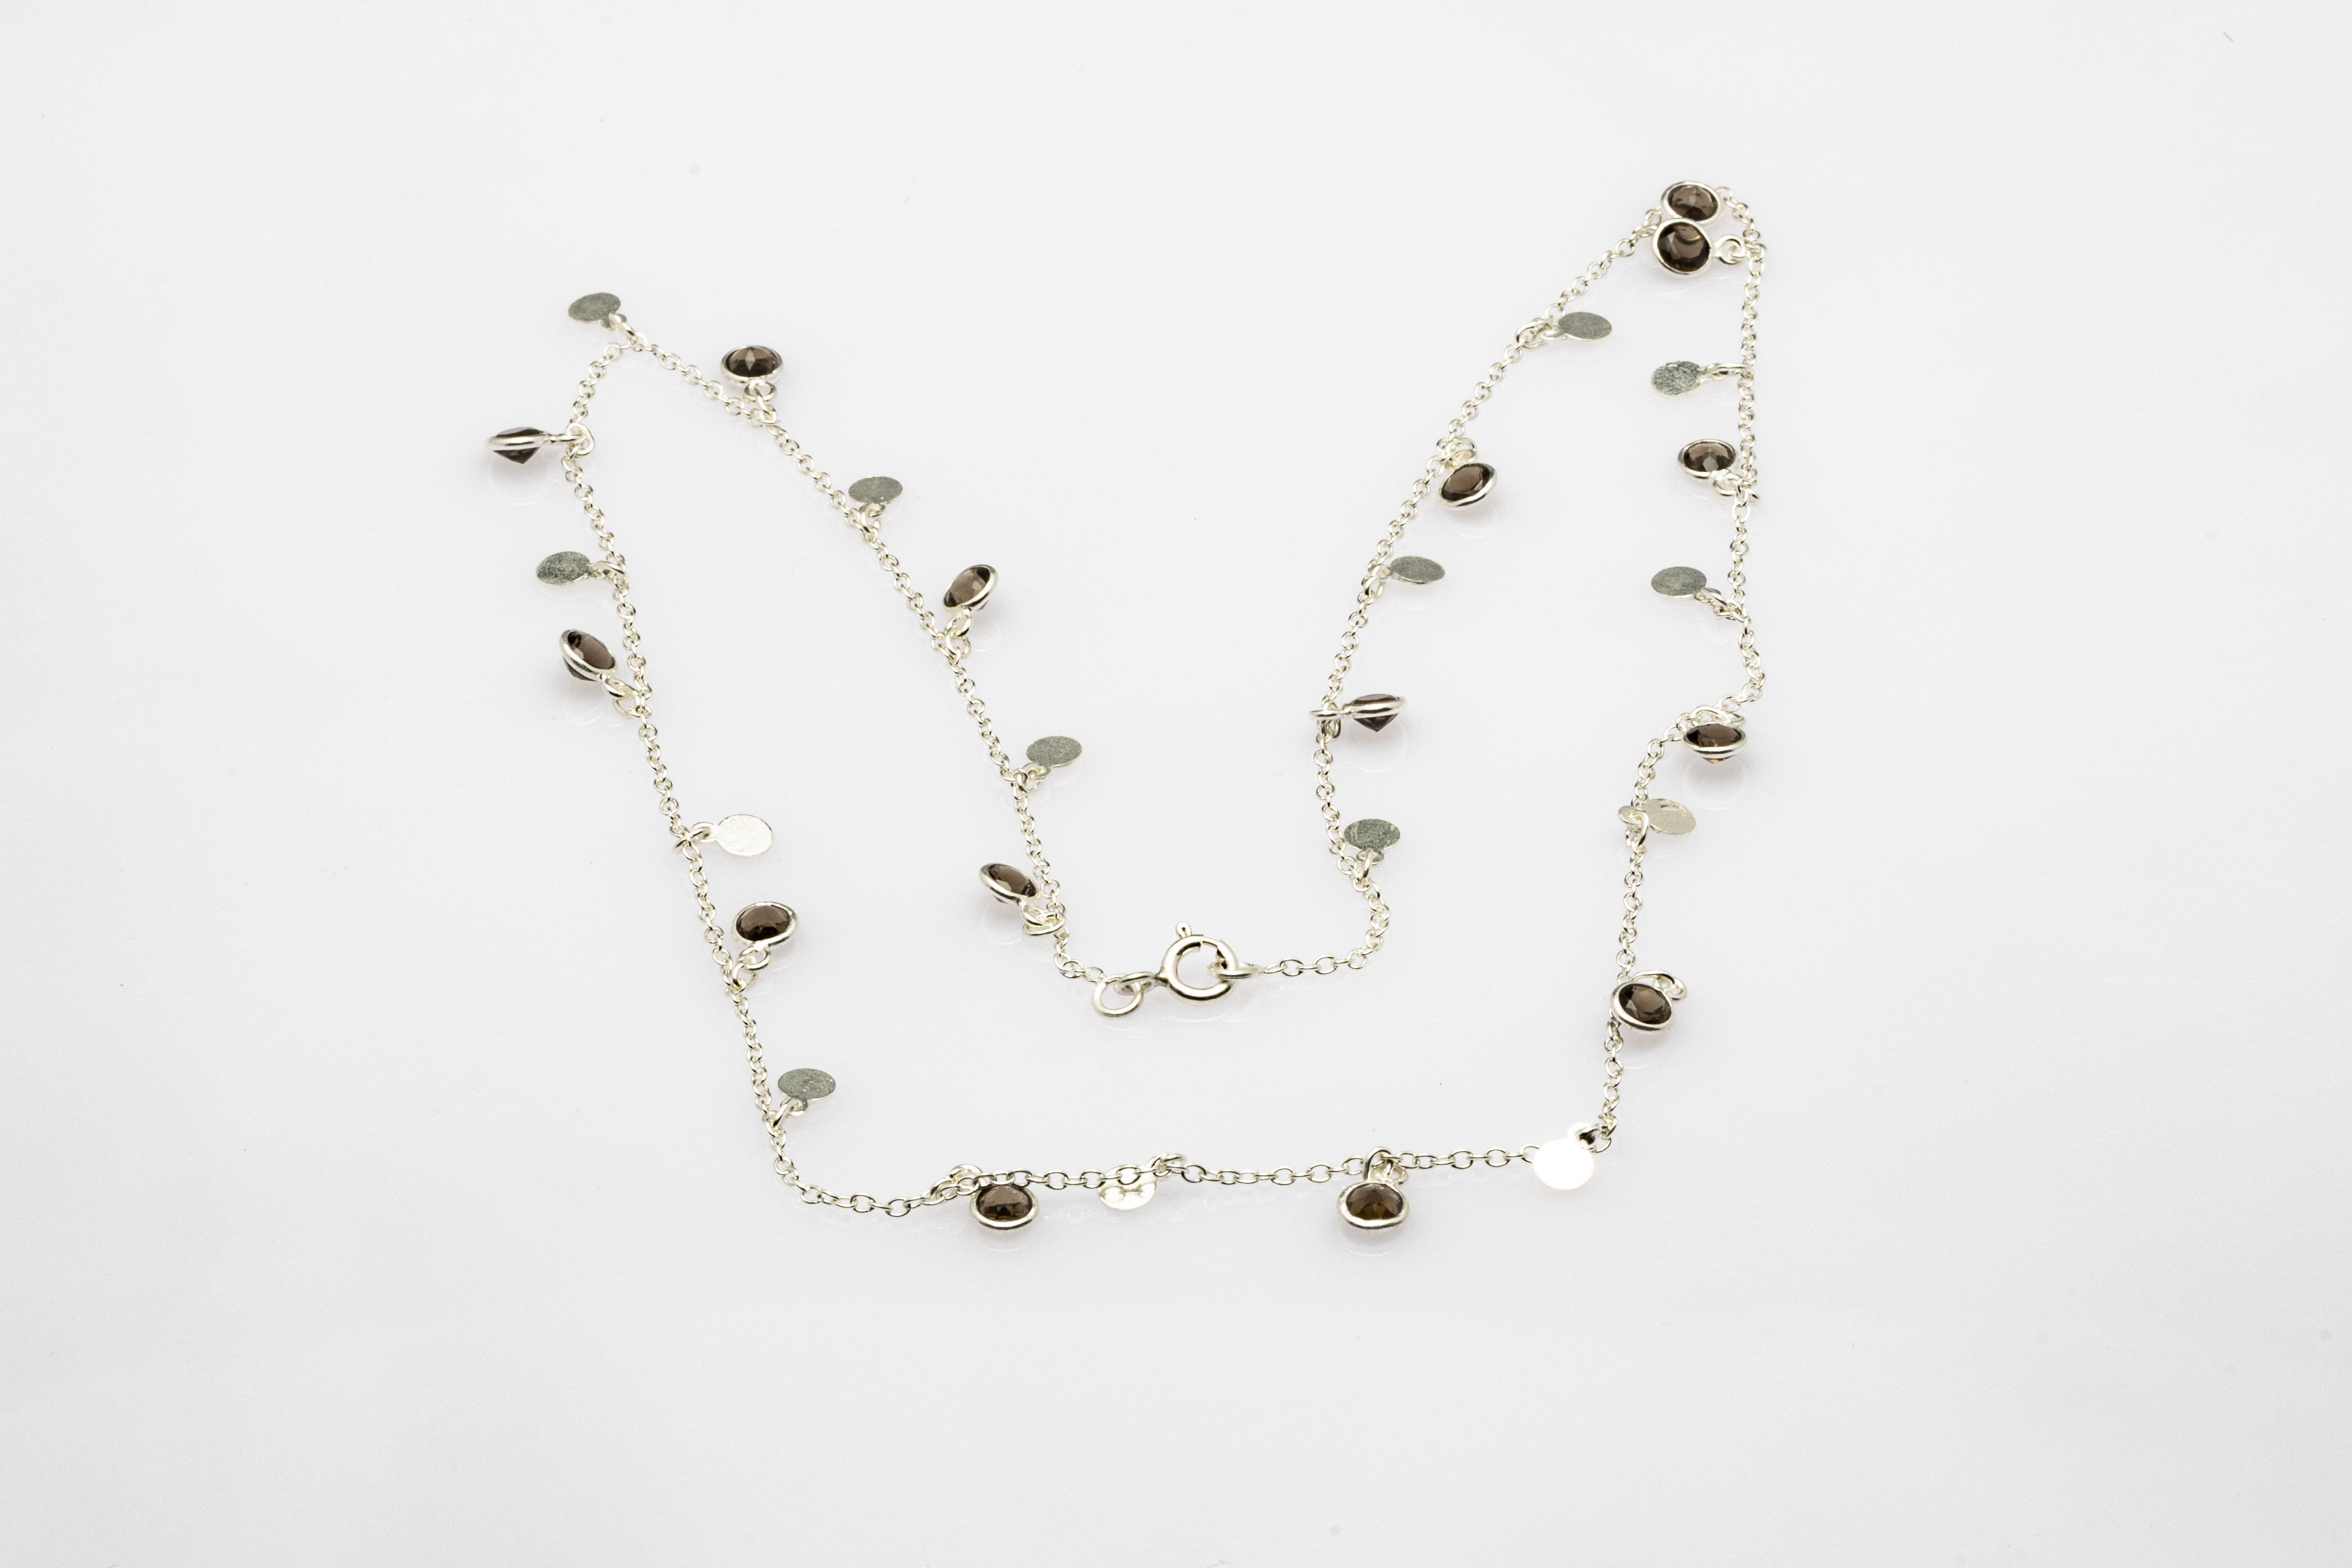 Blisse Allure Sterling Silver Necklace Chain with Semi precious stone charms